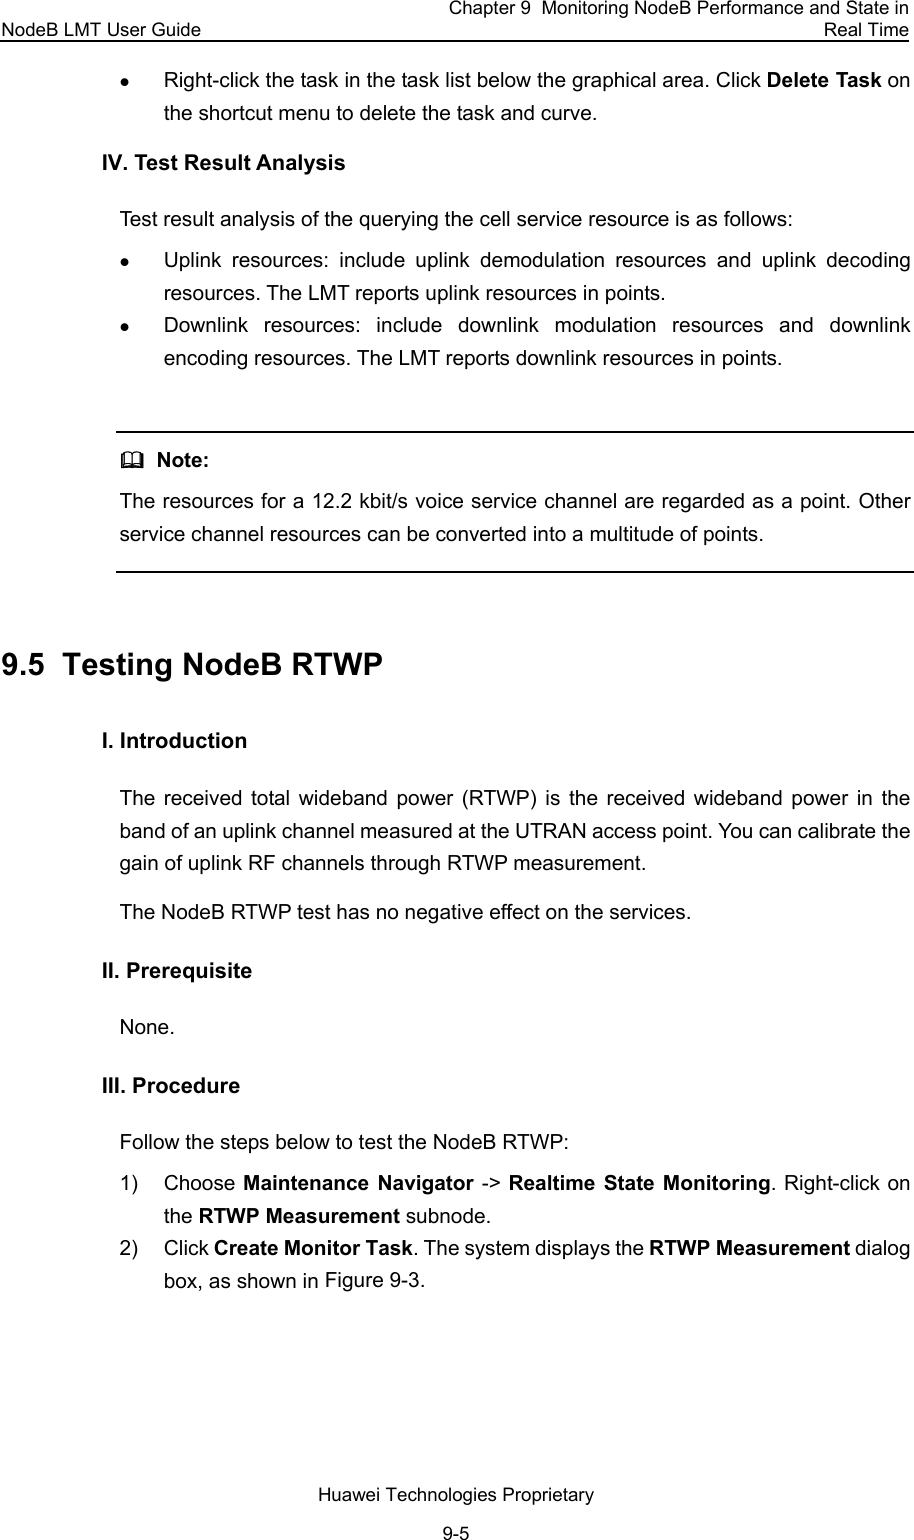 NodeB LMT User Guide Chapter 9  Monitoring NodeB Performance and State in Real Time Huawei Technologies Proprietary 9-5 z Right-click the task in the task list below the graphical area. Click Delete Task on the shortcut menu to delete the task and curve. IV. Test Result Analysis  Test result analysis of the querying the cell service resource is as follows:  z Uplink resources: include uplink demodulation resources and uplink decoding resources. The LMT reports uplink resources in points.  z Downlink resources: include downlink modulation resources and downlink encoding resources. The LMT reports downlink resources in points.    Note: The resources for a 12.2 kbit/s voice service channel are regarded as a point. Other service channel resources can be converted into a multitude of points.  9.5  Testing NodeB RTWP  I. Introduction  The received total wideband power (RTWP) is the received wideband power in the band of an uplink channel measured at the UTRAN access point. You can calibrate the gain of uplink RF channels through RTWP measurement. The NodeB RTWP test has no negative effect on the services. II. Prerequisite None.  III. Procedure  Follow the steps below to test the NodeB RTWP: 1) Choose Maintenance Navigator -&gt; Realtime State Monitoring. Right-click on the RTWP Measurement subnode.  2) Click Create Monitor Task. The system displays the RTWP Measurement dialog box, as shown in Figure 9-3. 